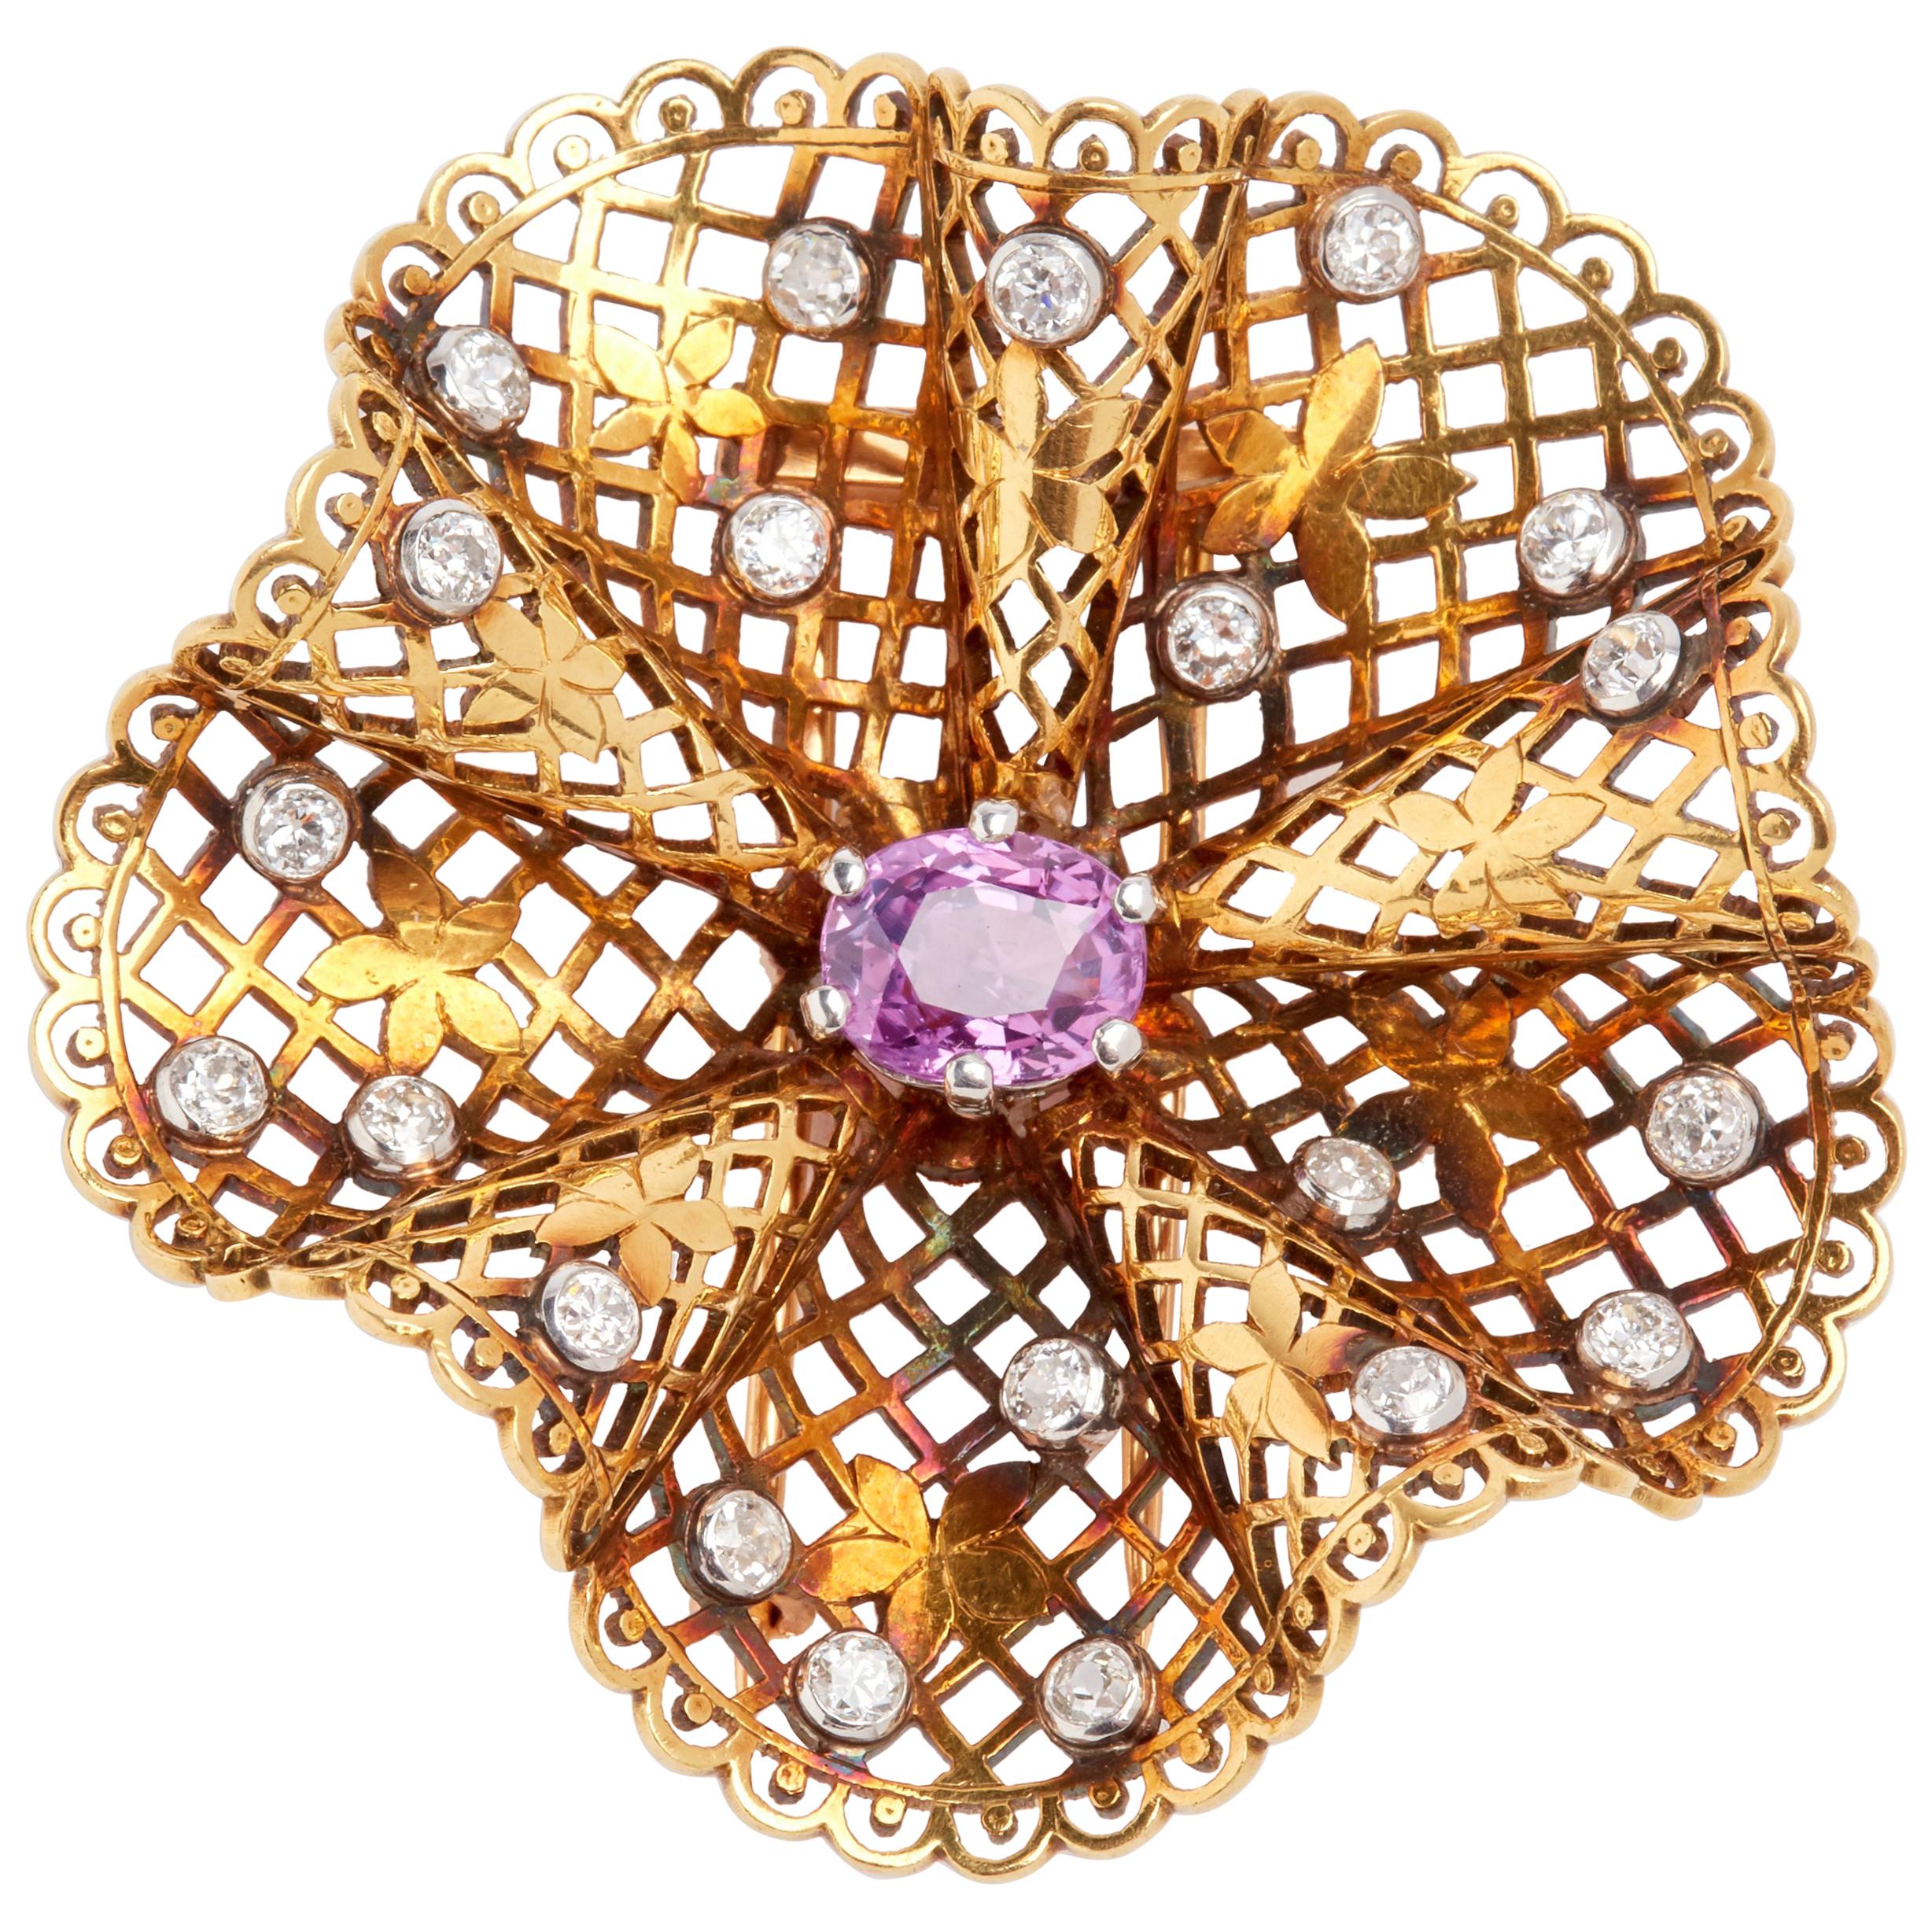 Gold Filligree Brooch with Pink Sapphire and Diamonds